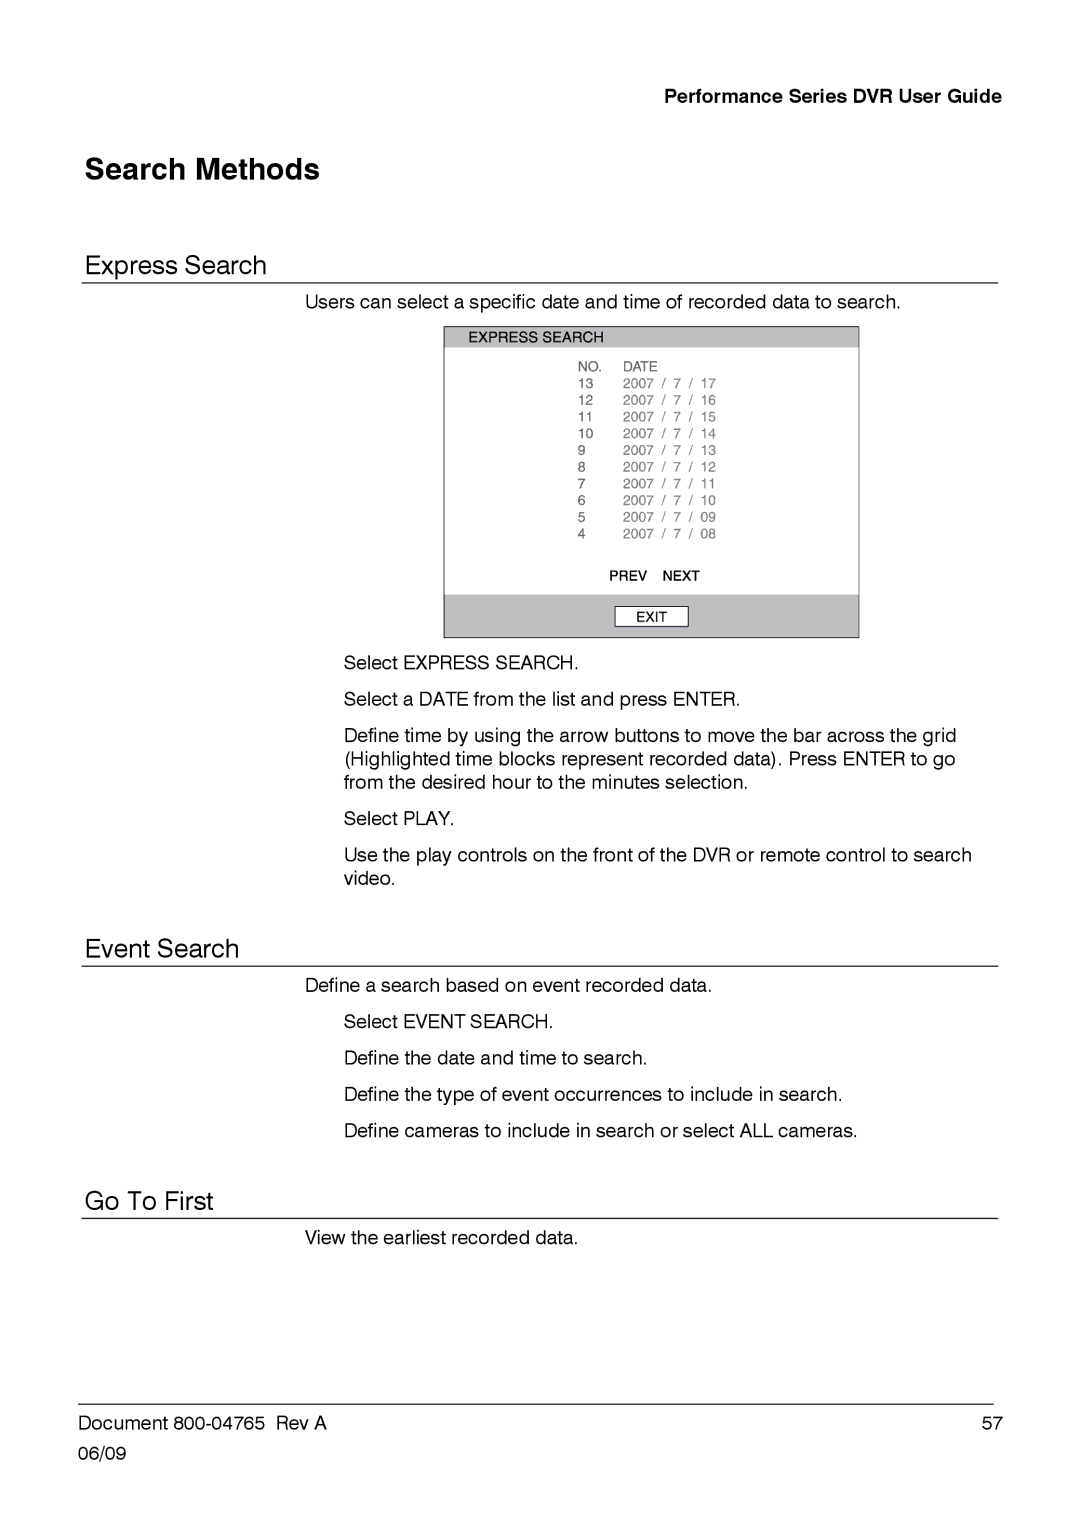 Honeywell HRDPX manual Search Methods, Express Search, Event Search, Go To First 